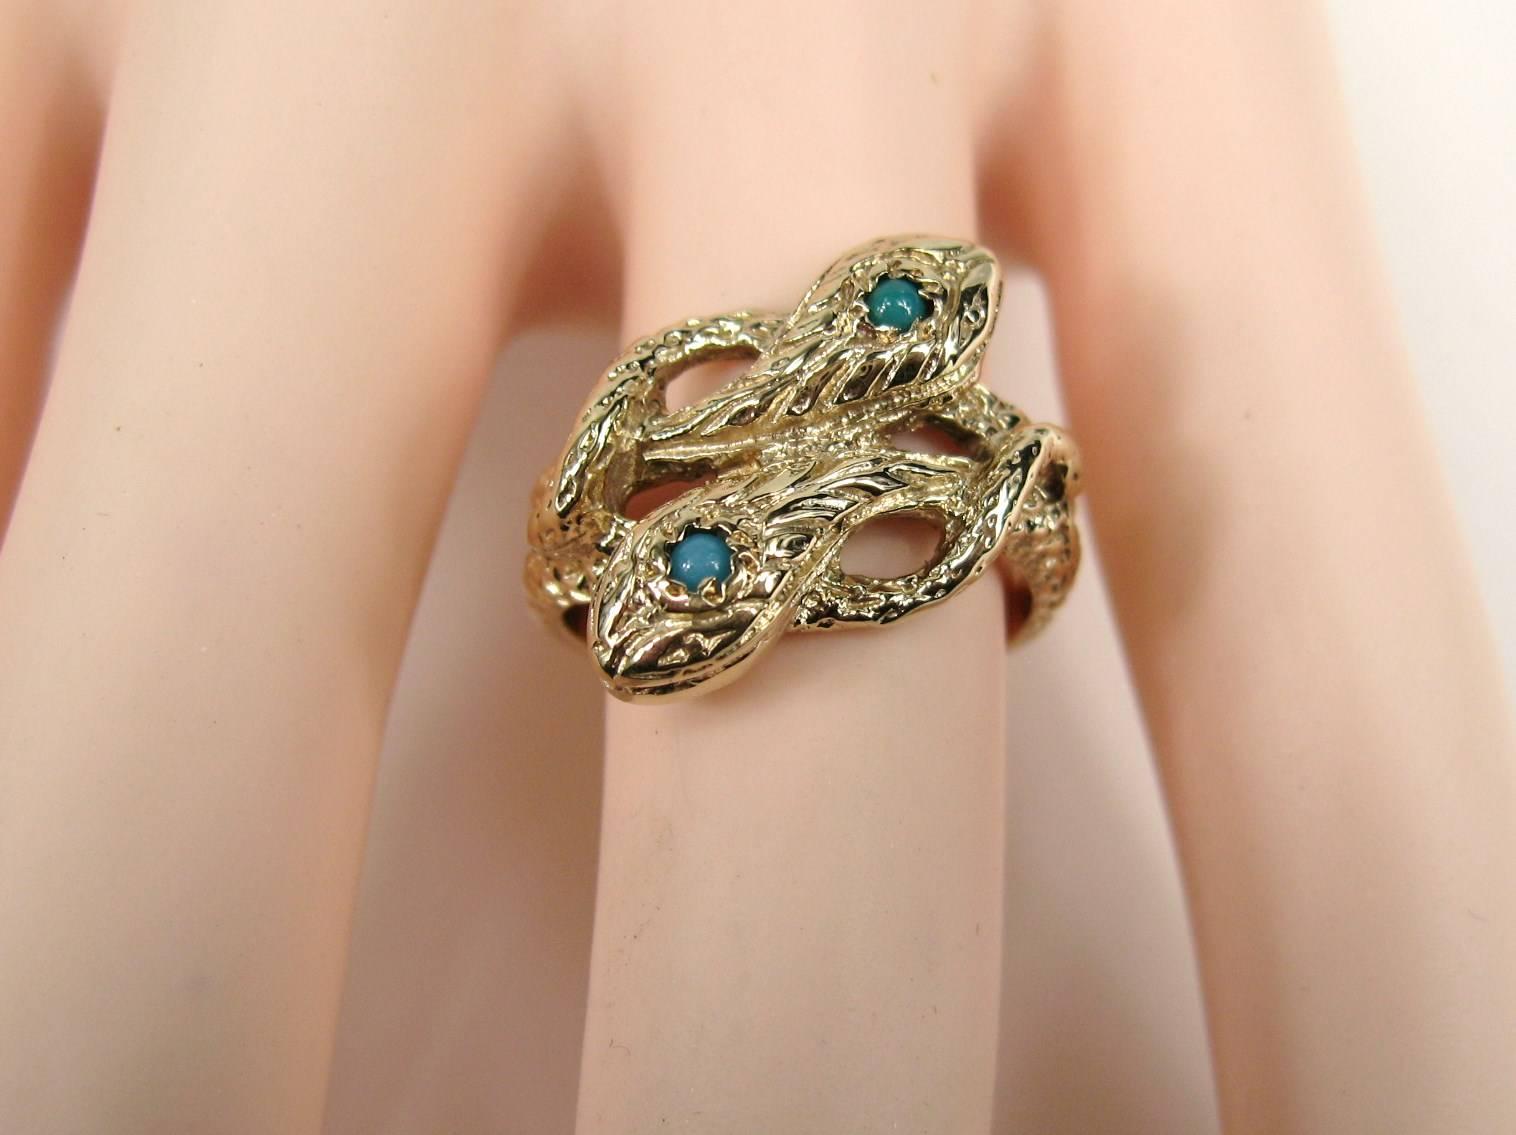 Victorian 14 Karat Gold Double Headed Turquoise Snake Wedding Band Ring For Sale